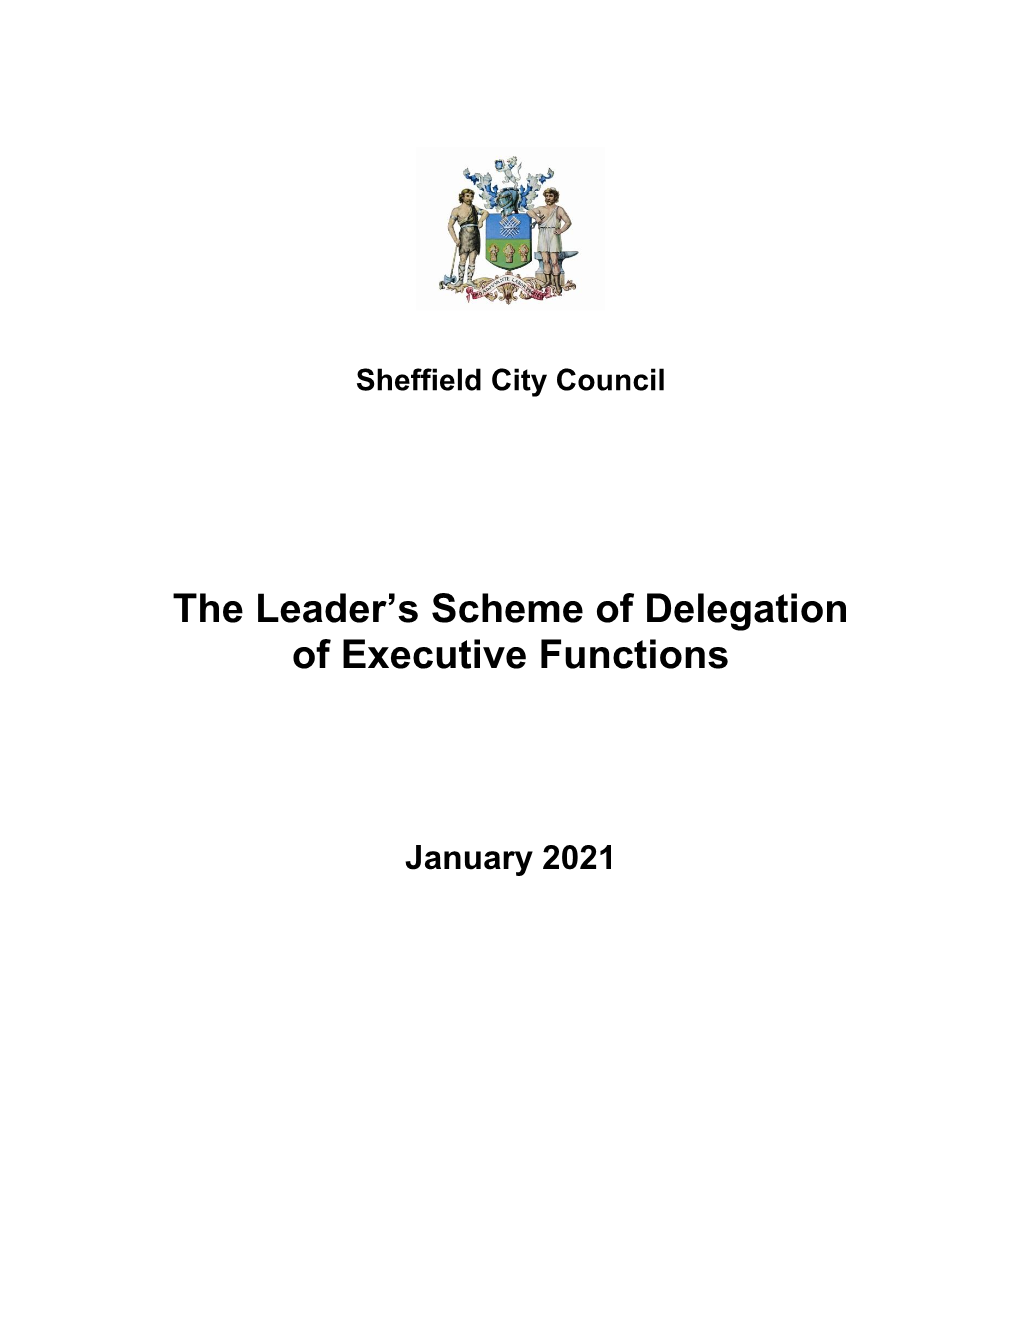 The Leader's Scheme of Delegation of Executive Functions